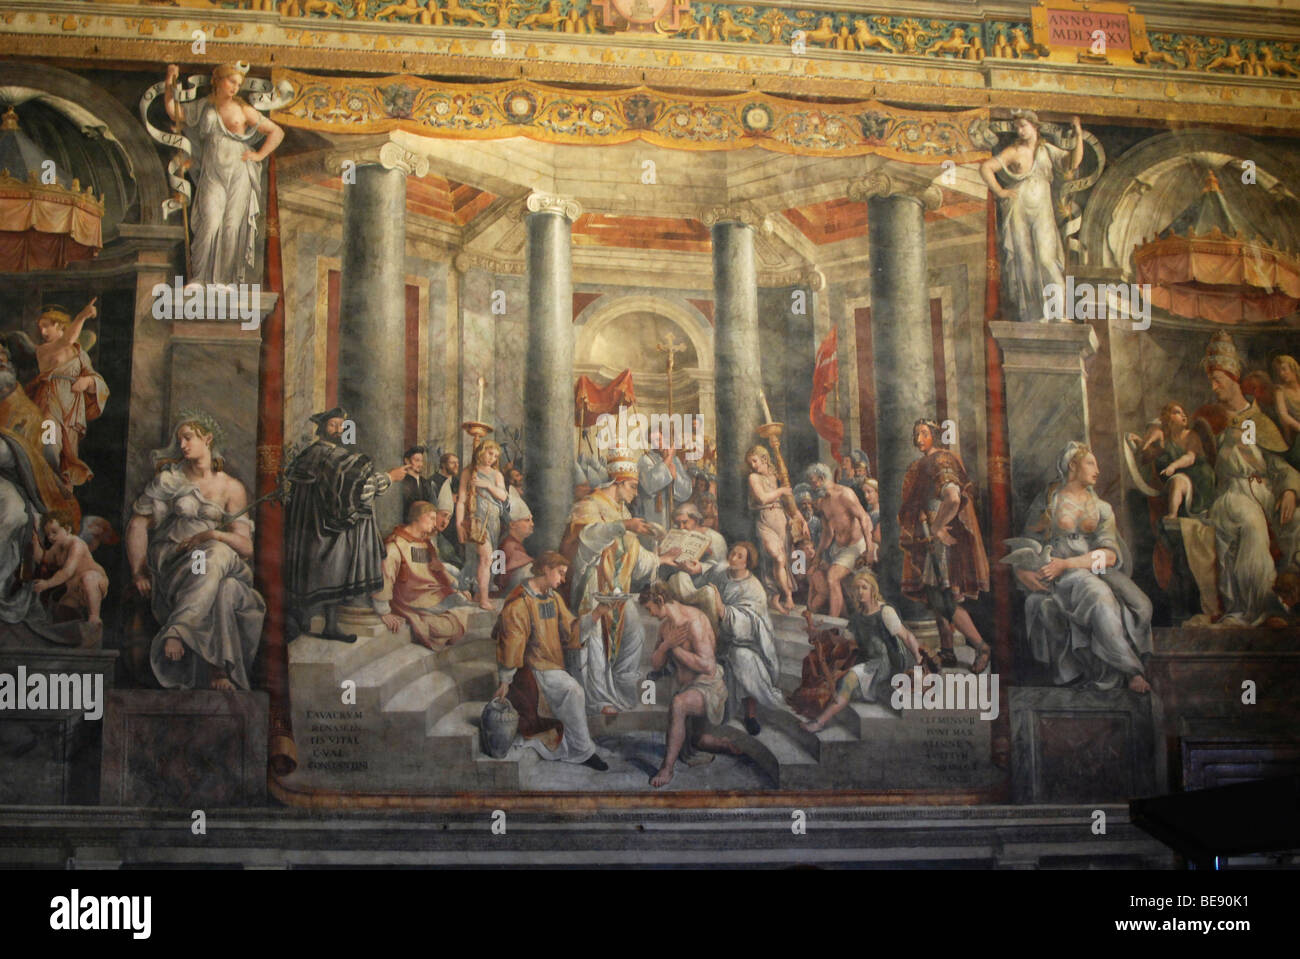 Painting Baptism of Constantine, Sala di Costantino, Vatican chambers, Vatican Museums, Old Town, Vatican City, Italy, Europe Stock Photo